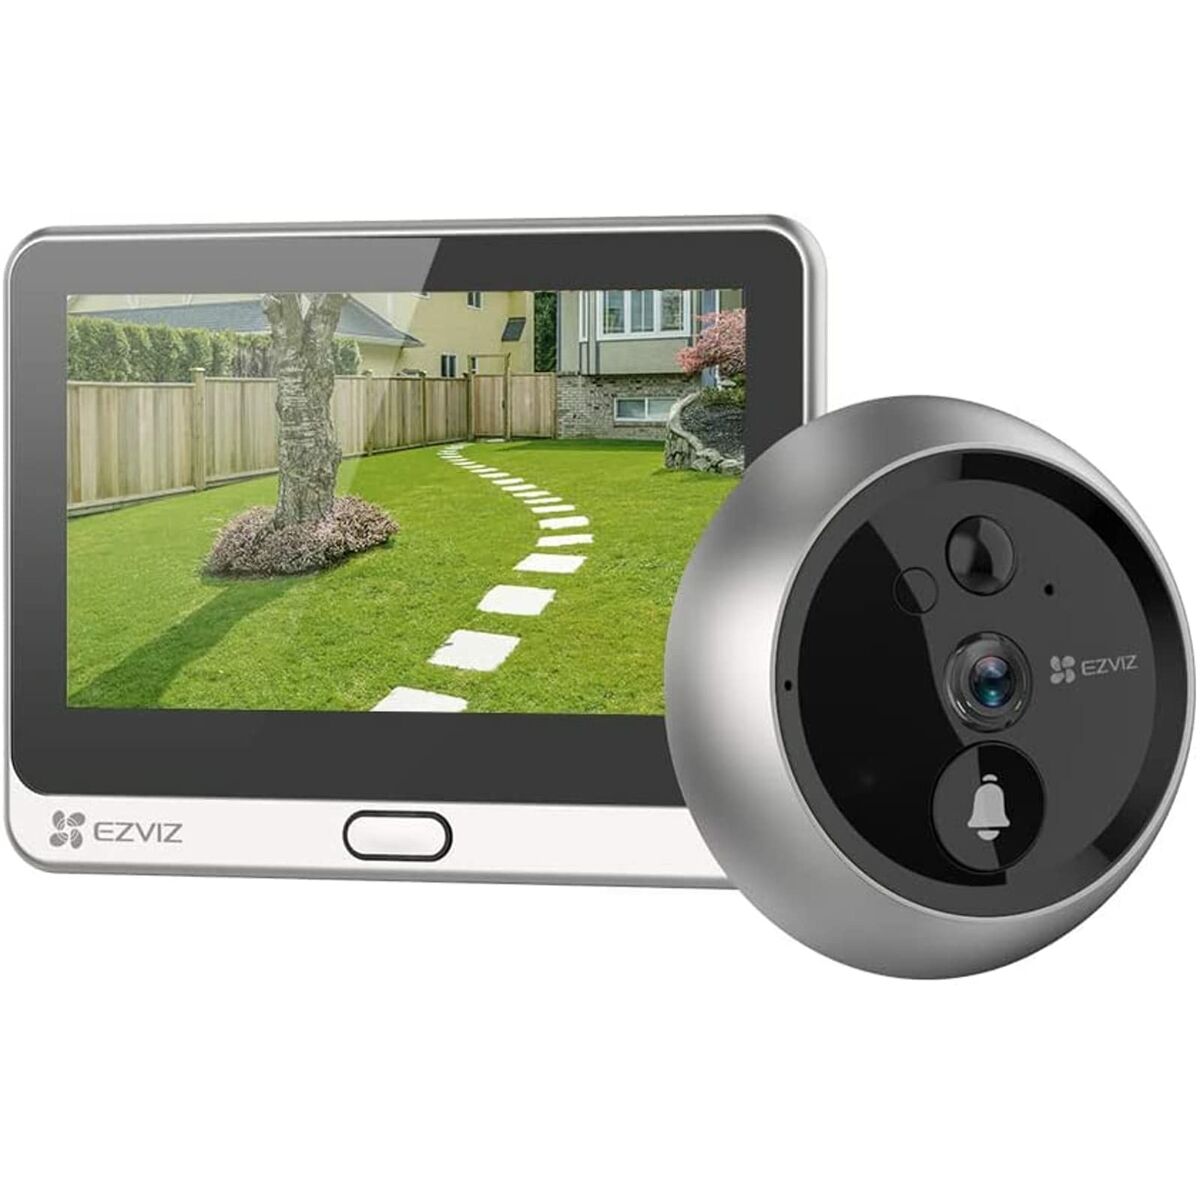 IP camera Ezviz DP2, Ezviz, DIY and tools, Prevention and safety, ip-camera-ezviz-dp2, Brand_Ezviz, category-reference-2399, category-reference-2471, category-reference-3209, category-reference-t-15436, category-reference-t-15495, category-reference-t-19651, category-reference-t-21086, category-reference-t-25211, Condition_NEW, entertainment, home automation / security, Price_100 - 200, small electric appliances, travel, RiotNook